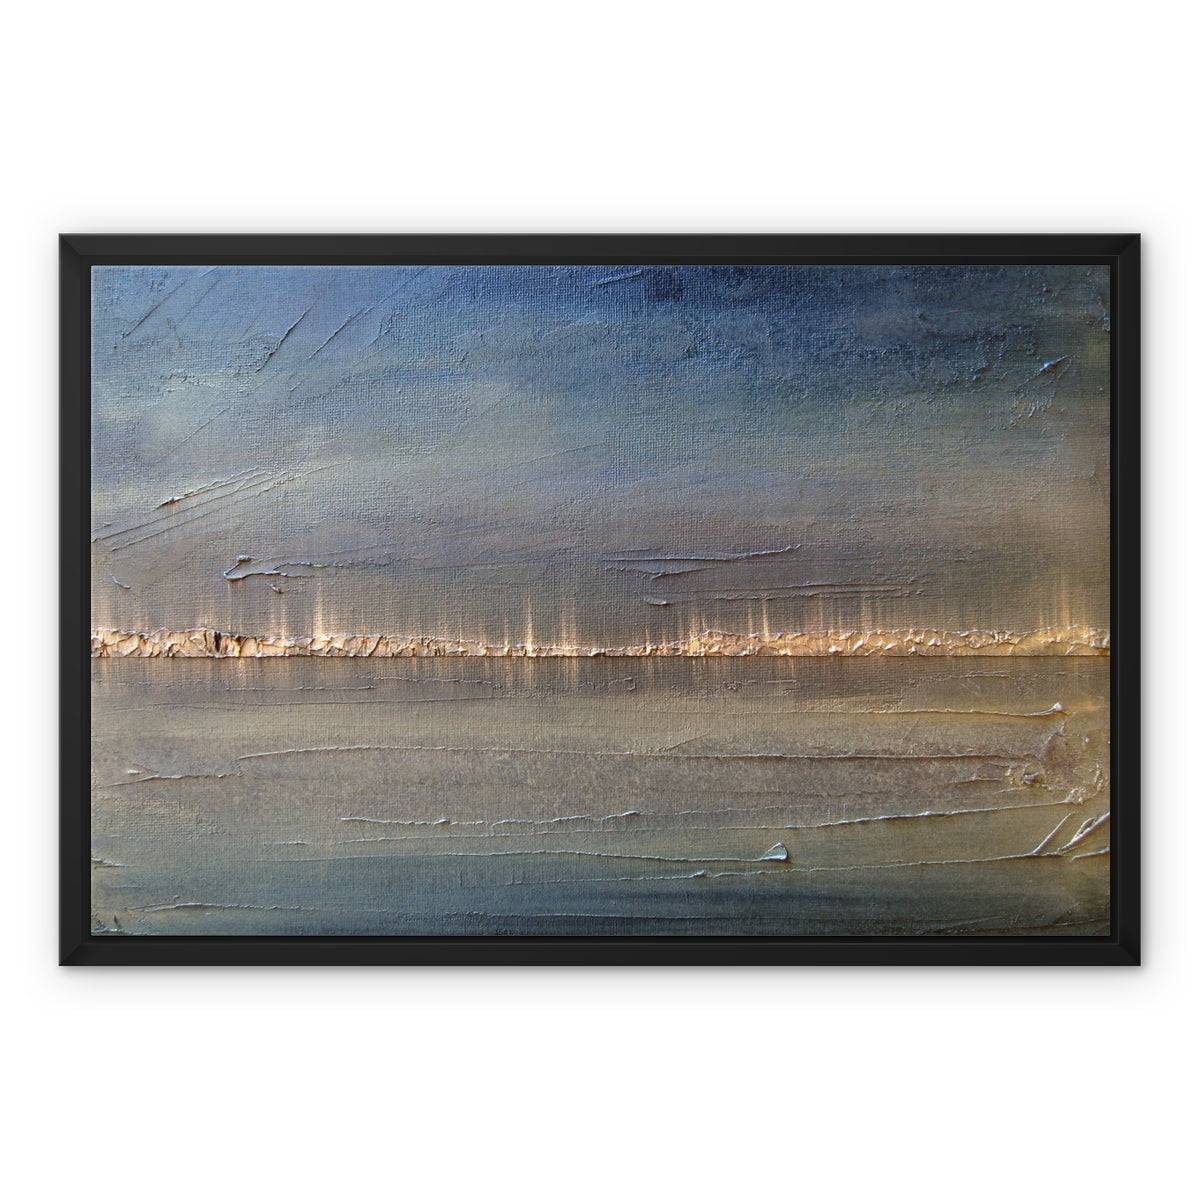 Distant Lights Lake Ontario Painting | Framed Canvas From Scotland-Floating Framed Canvas Prints-World Art Gallery-24"x18"-Paintings, Prints, Homeware, Art Gifts From Scotland By Scottish Artist Kevin Hunter